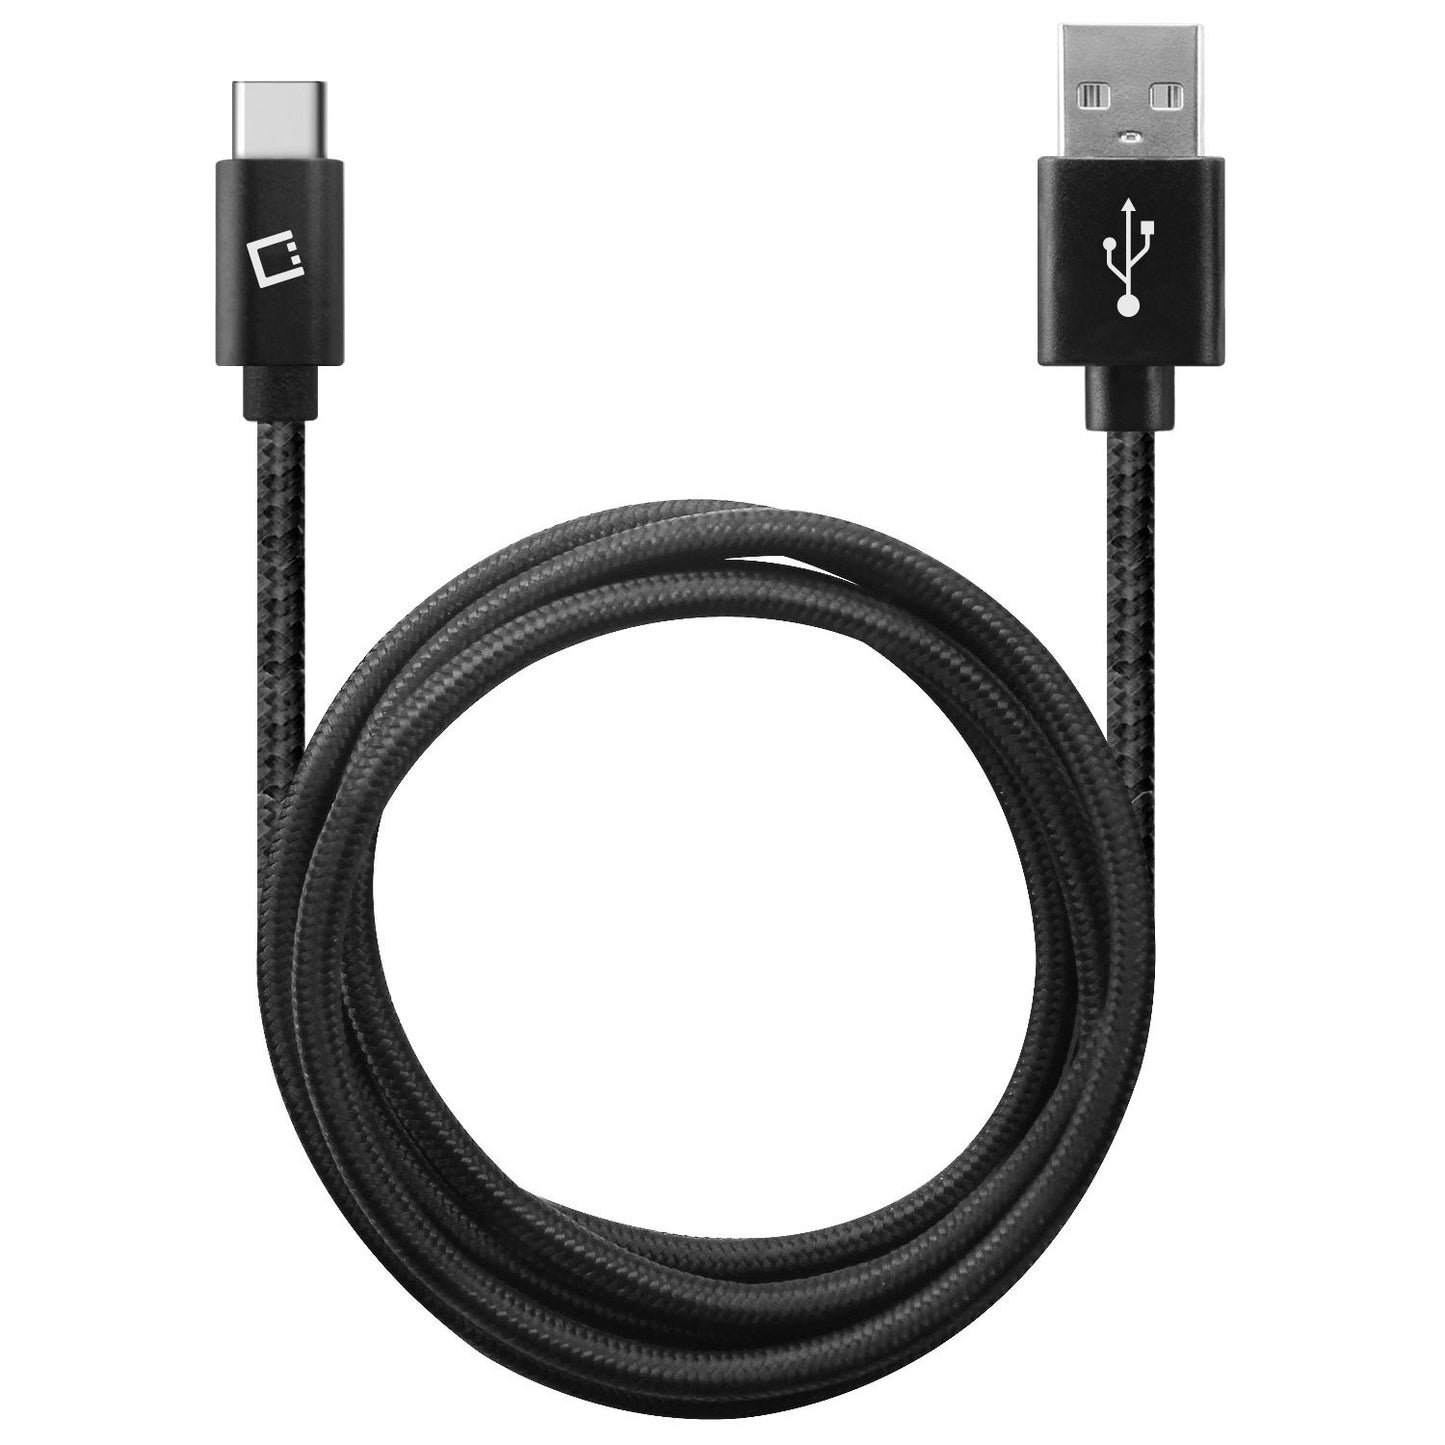 DCA420BK - 4 Ft. Durable Nylon Braided Type C Data Transfer & Sync Fast Charge Cable